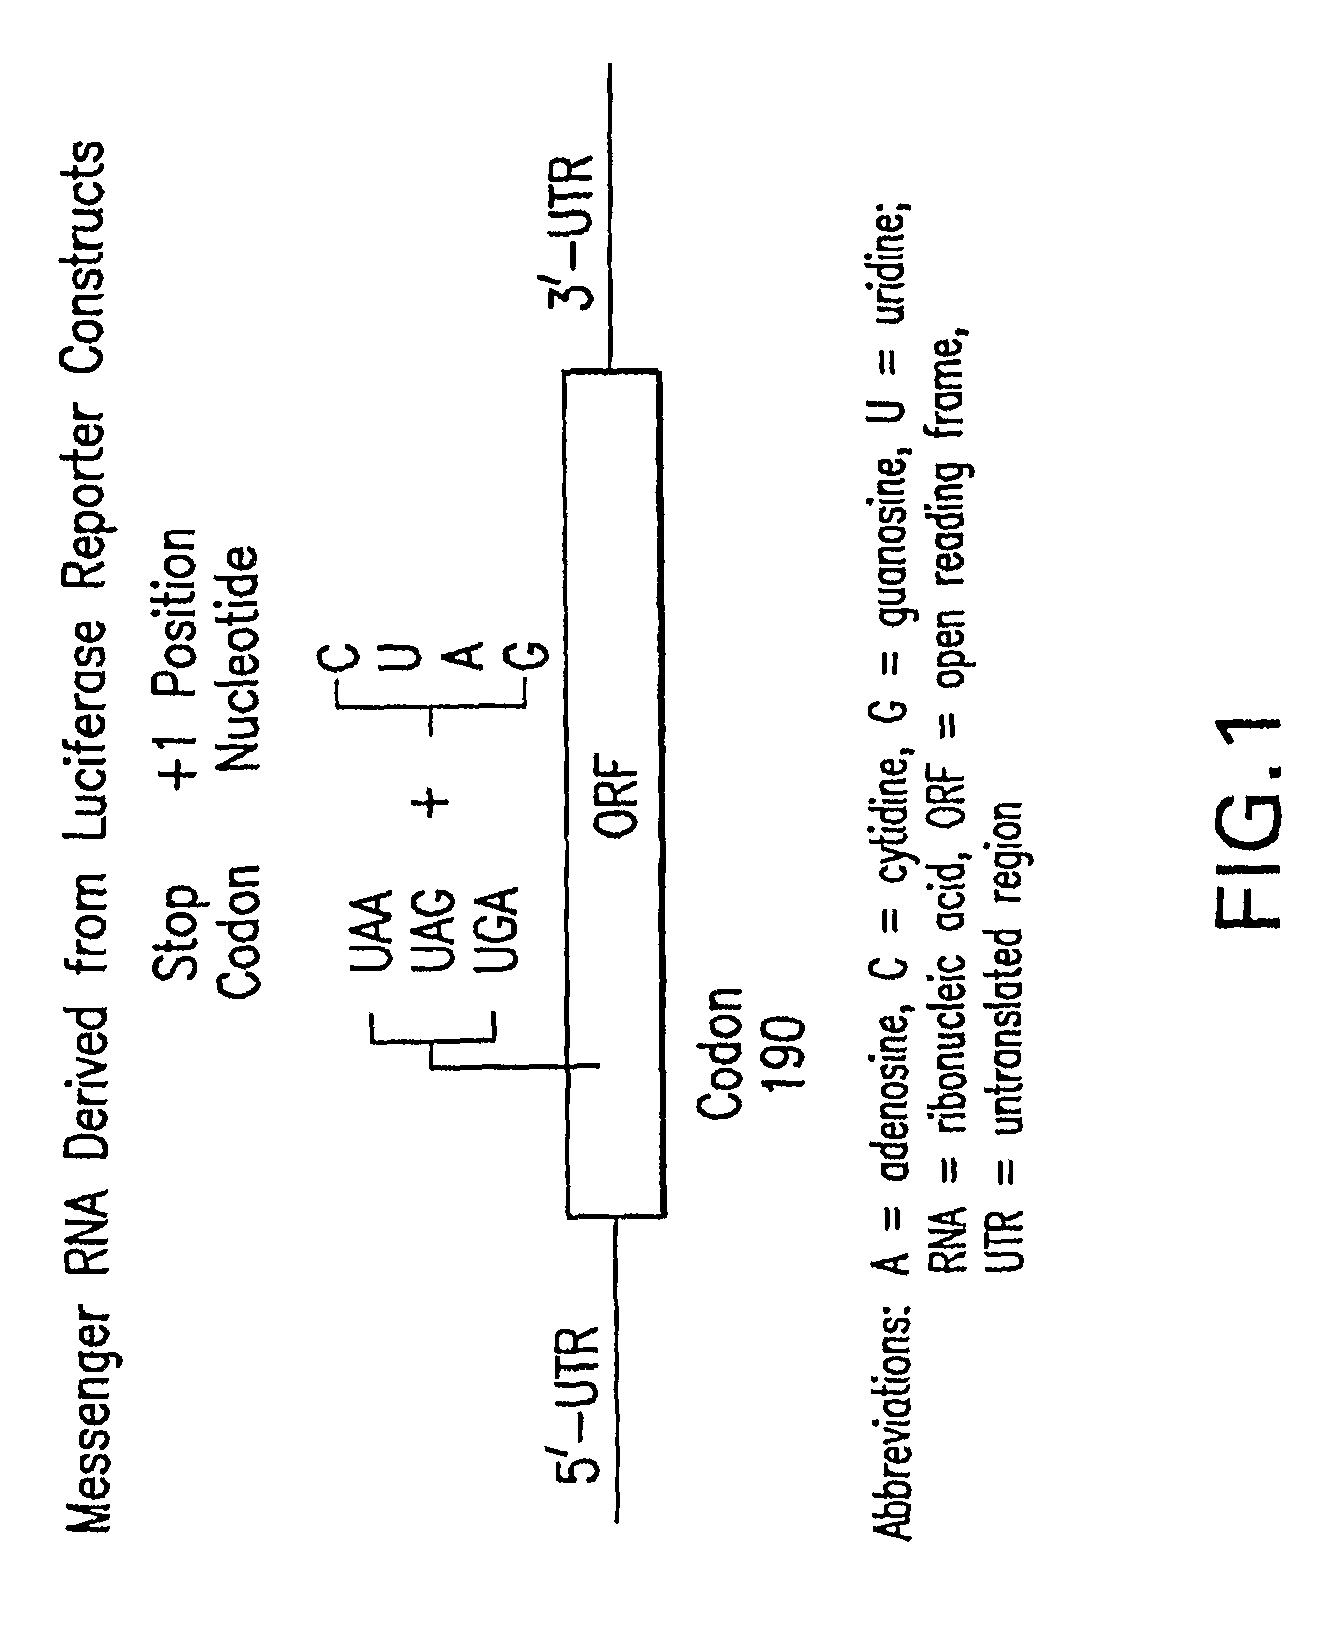 Methods for the production of functional protein from DNA having a nonsense mutation and the treatment of disorders associated therewith